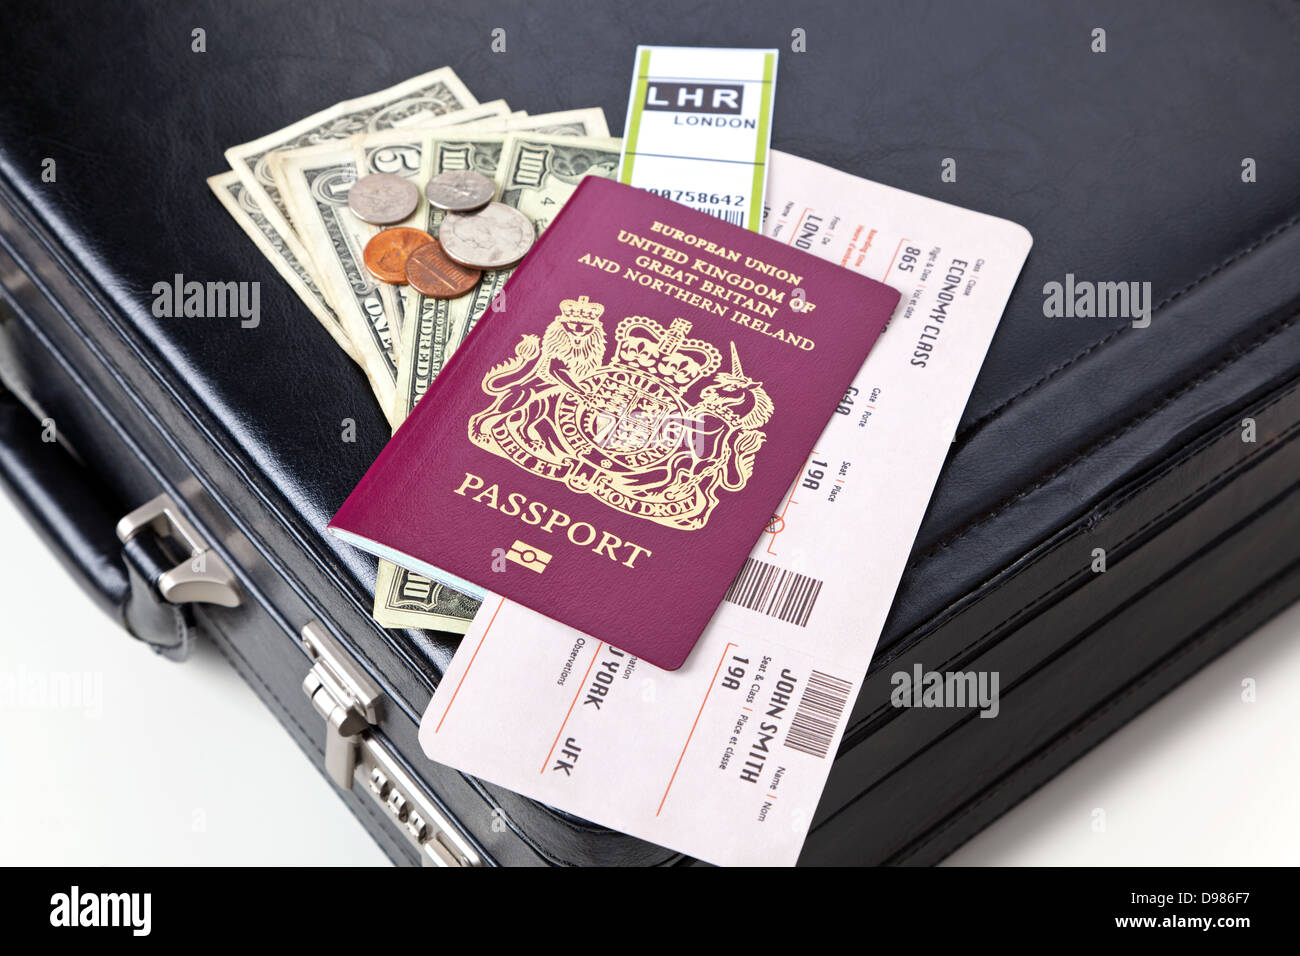 Briefcase, passport, airline ticket, money and baggage label. Stock Photo